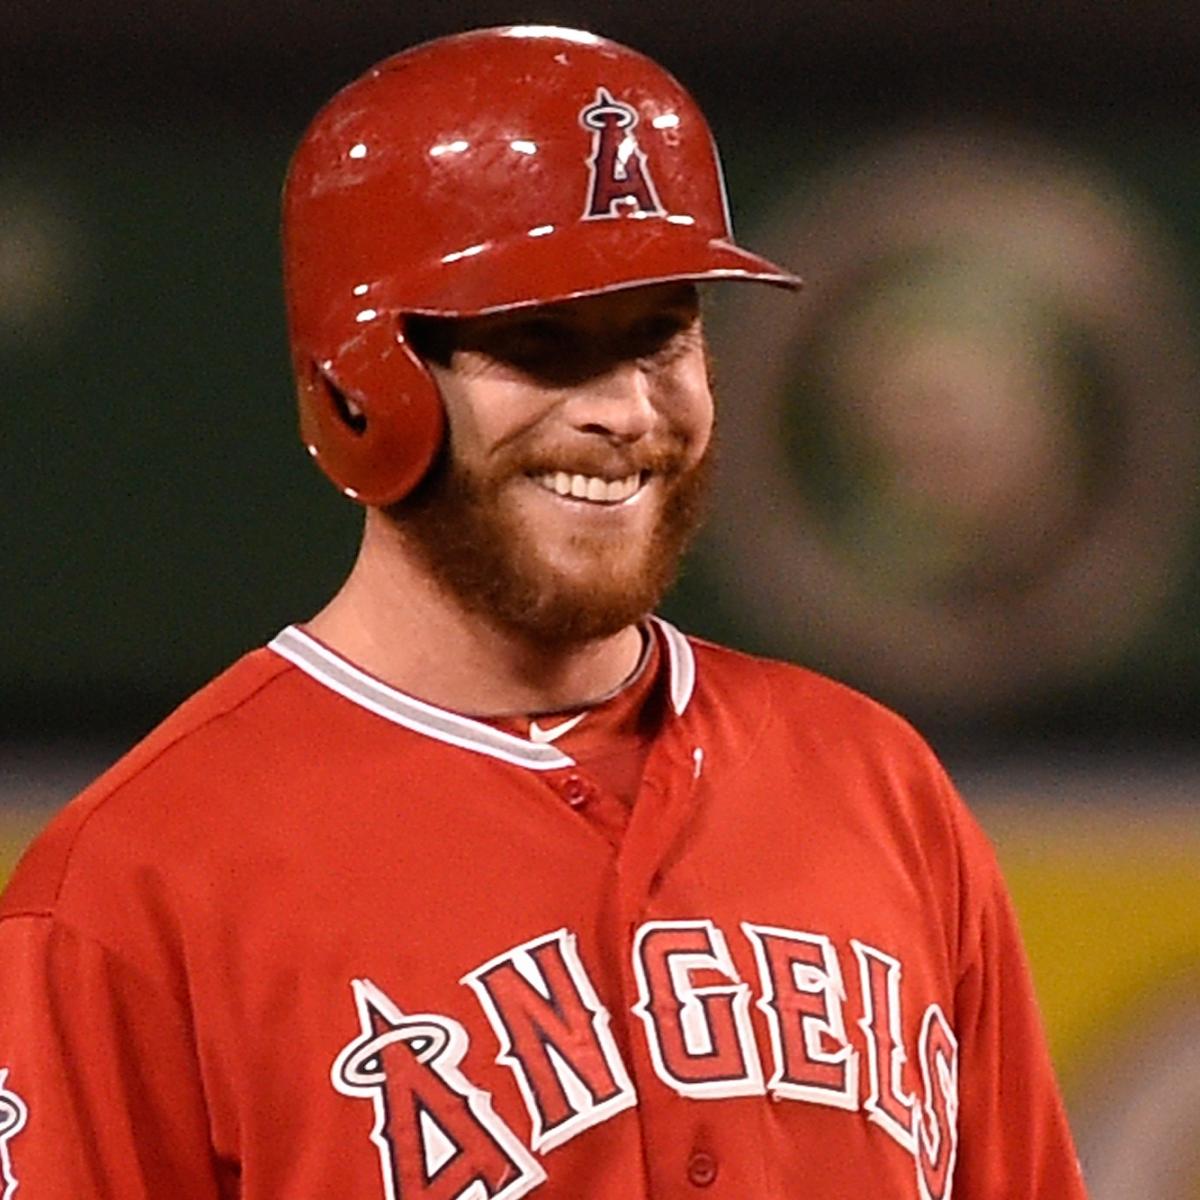 Done deal: Josh Hamilton traded by Angels to Texas Rangers